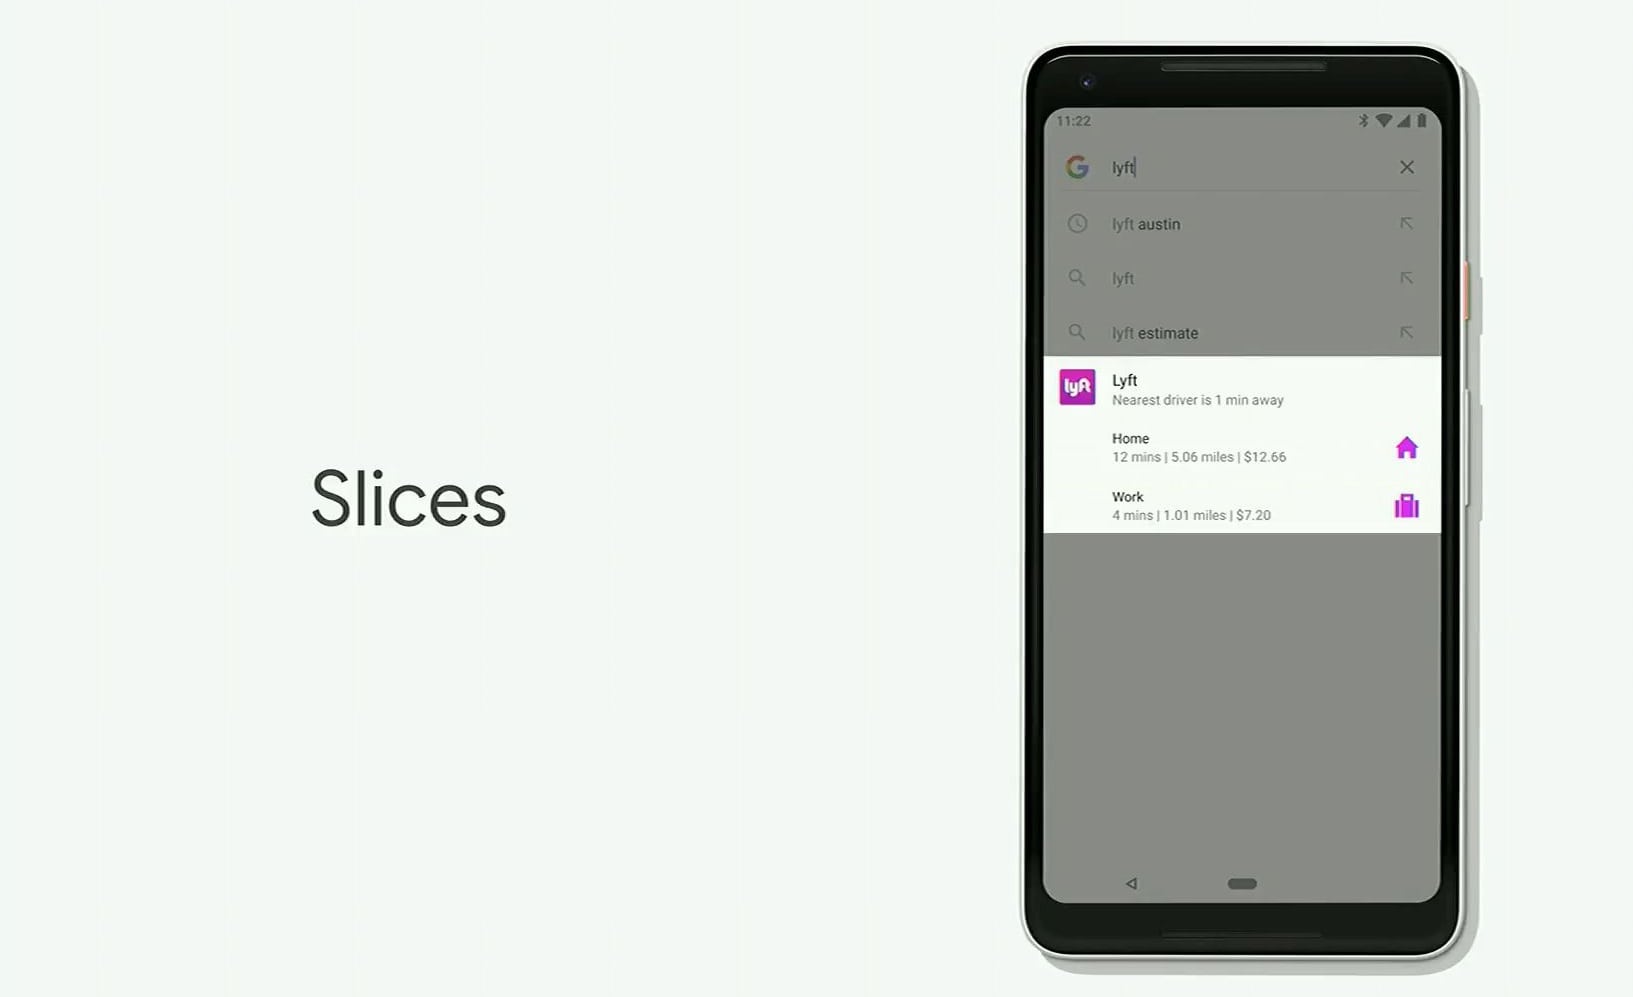 Android P Slices